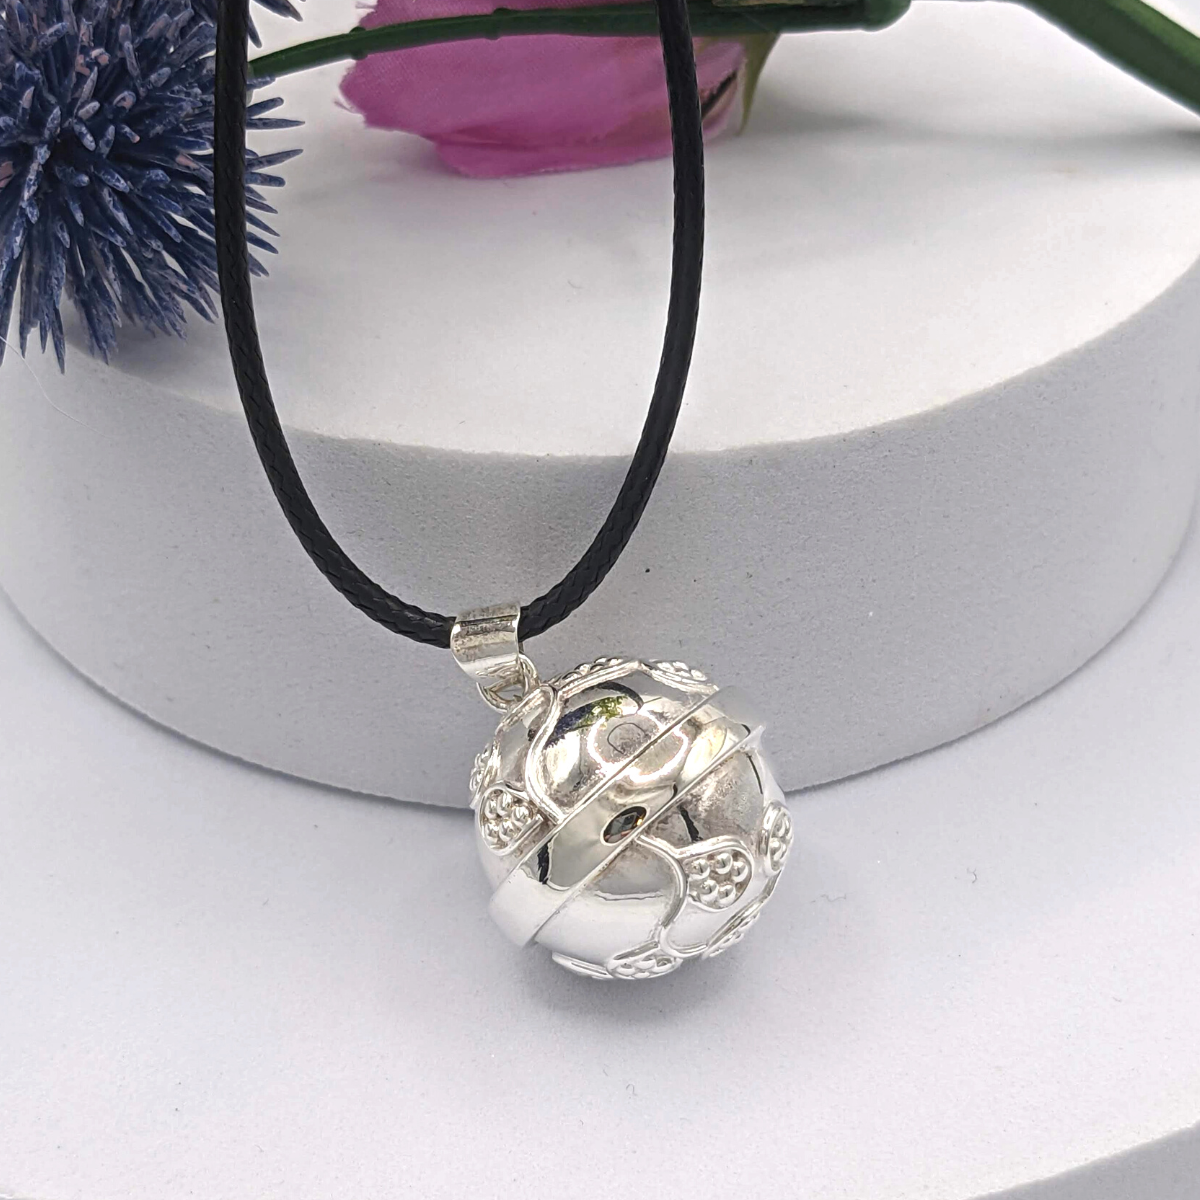 Scrolling Vine Design on Silver Orb with a chime inside. Choose your favorite chain or cord. Nature Reflections Scrolling Vines Angel Caller Necklace